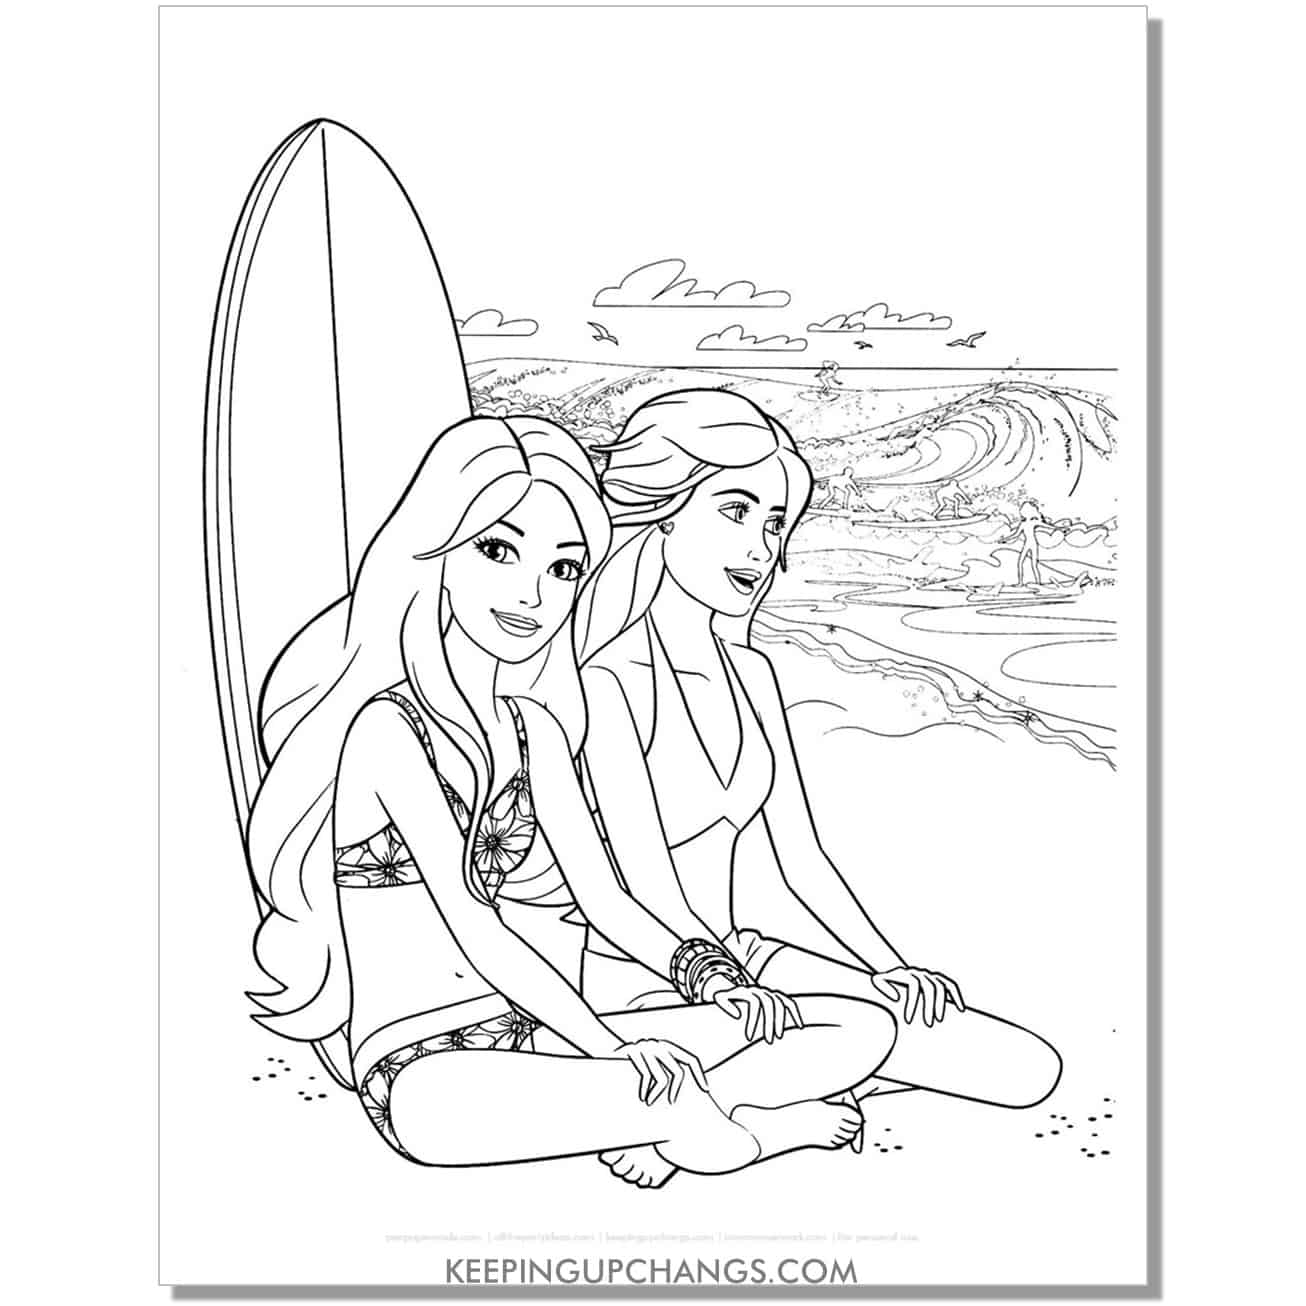 barbie sitting at the beach with a friend coloring page.